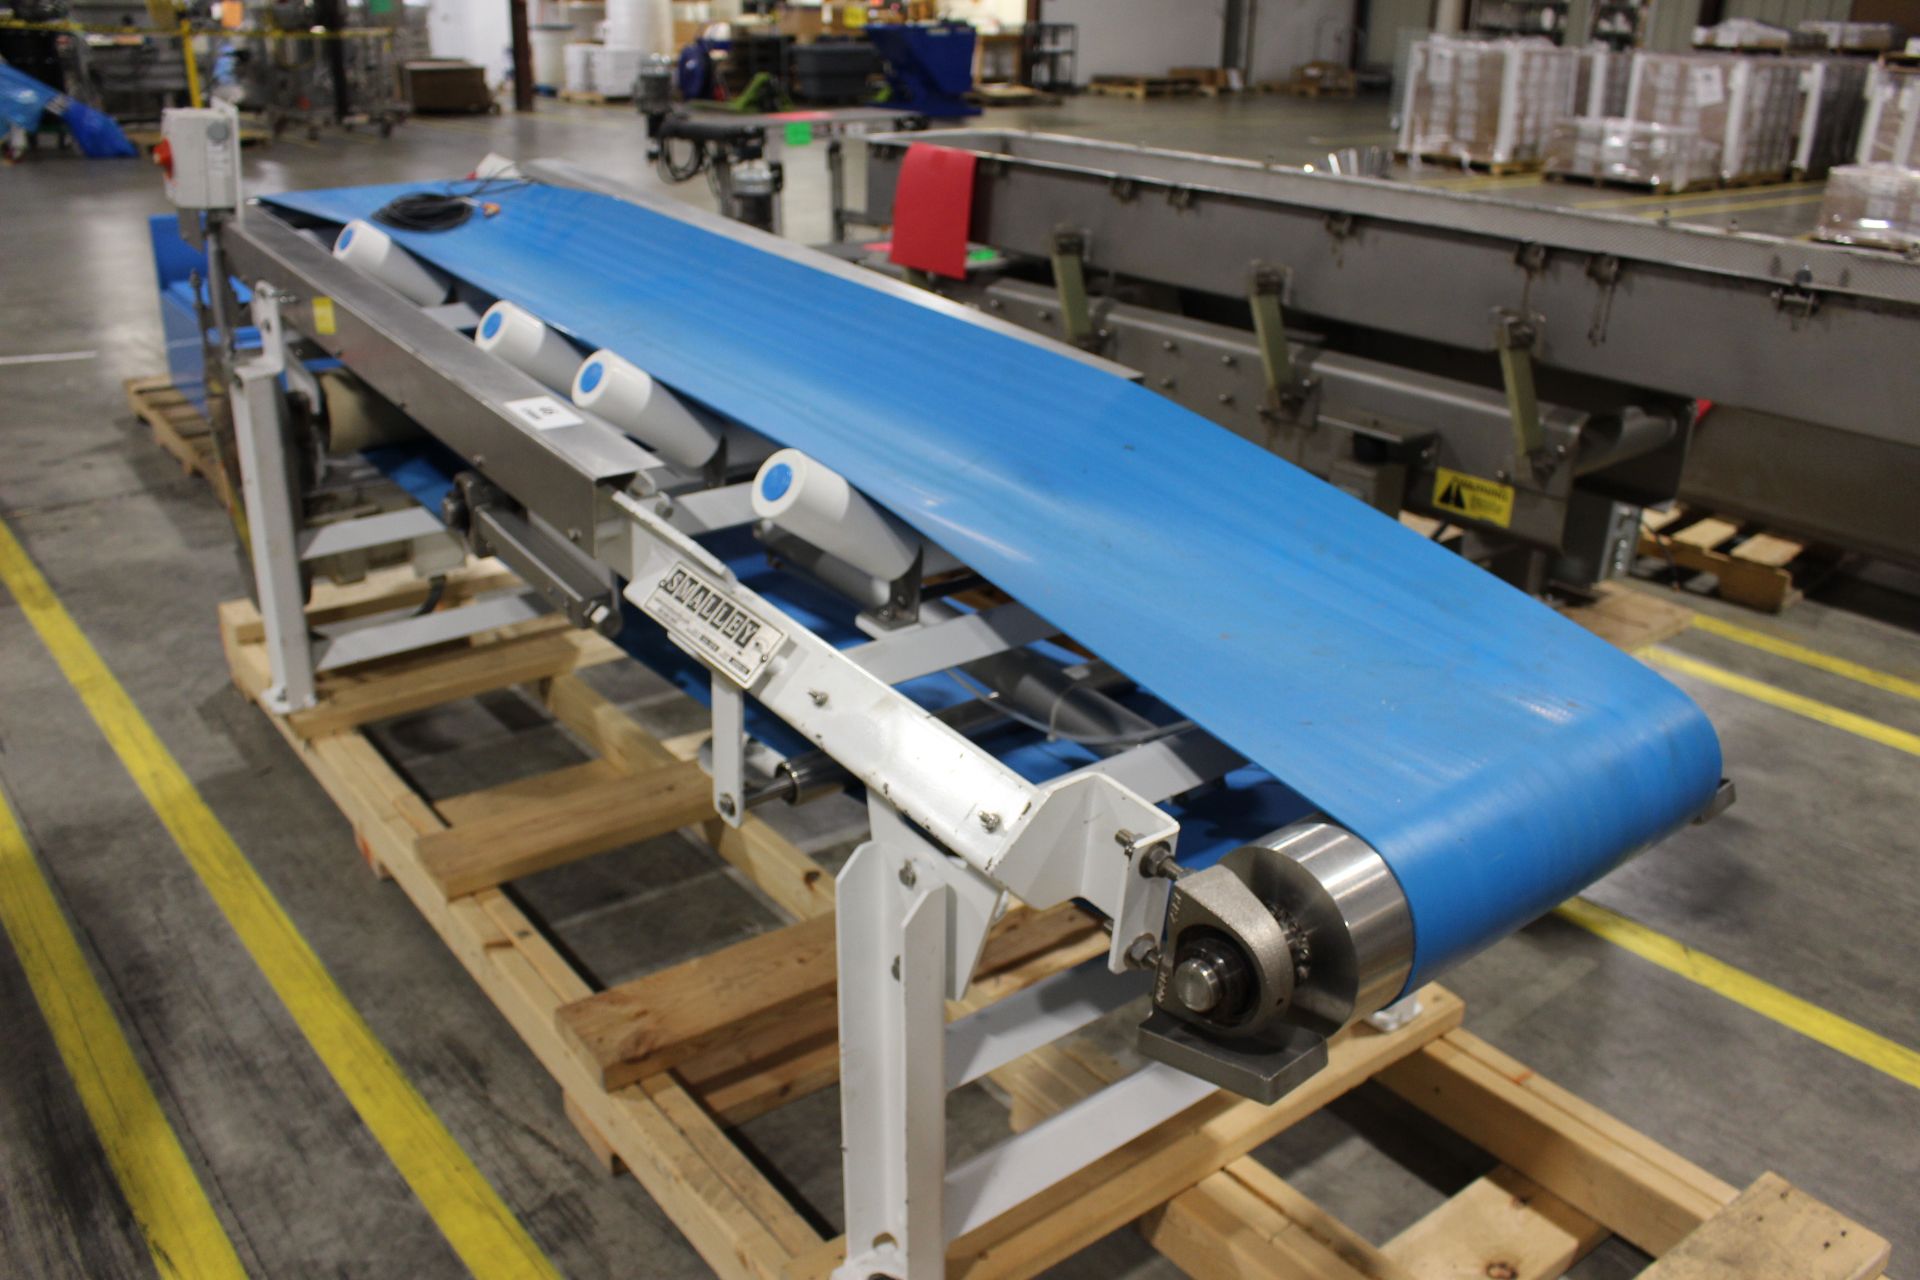 Asset 46 - Smalley 18" wide x 9-ft long Conveyor serial#24043-02 built 2016 - bed is tapered to